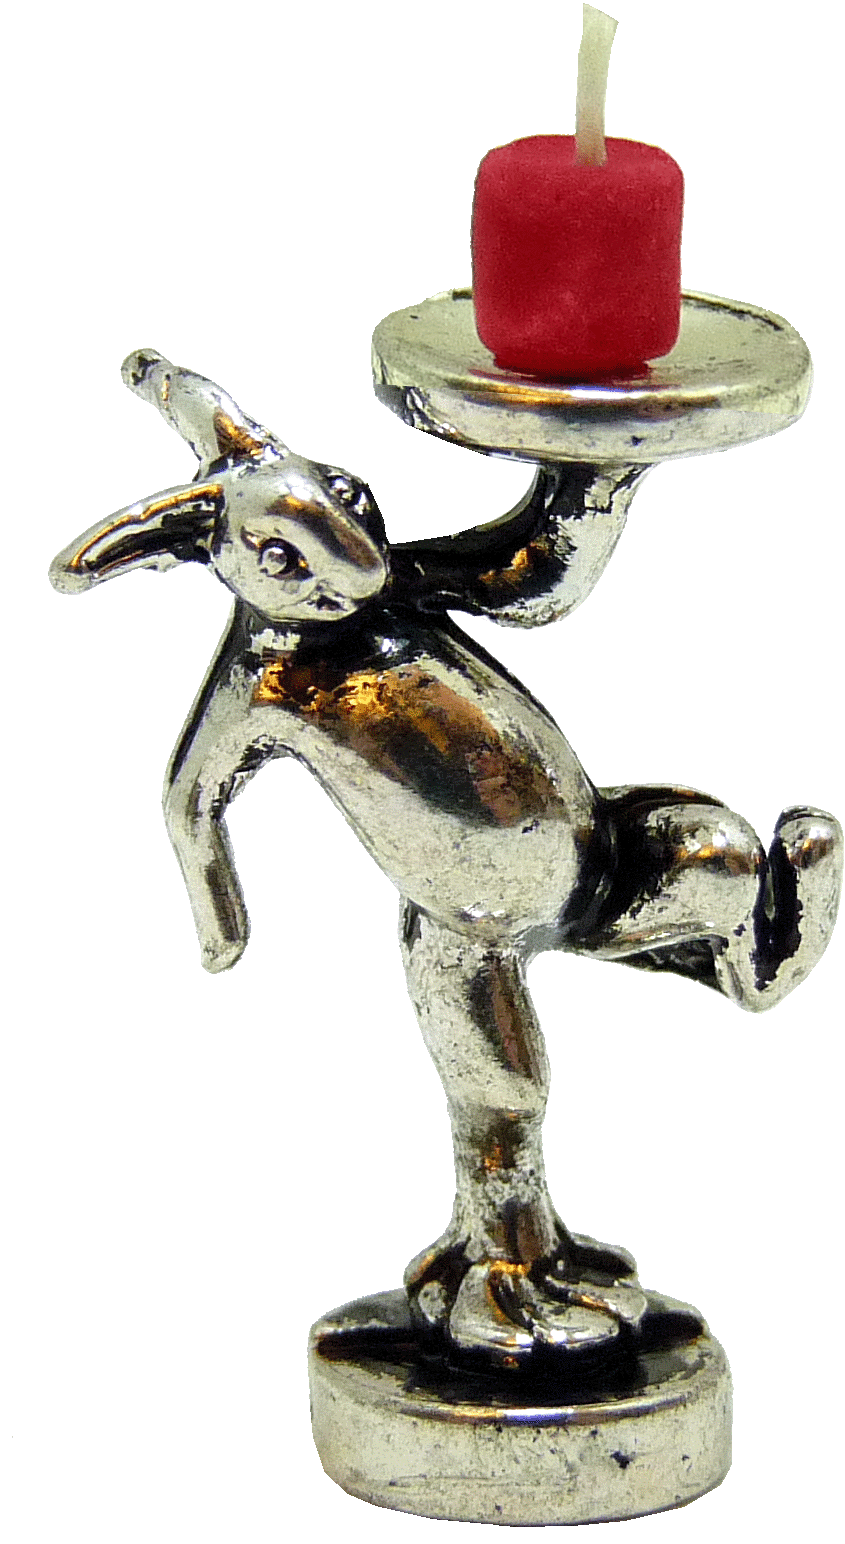 Rabbit Candlestick Holder with Red Candle